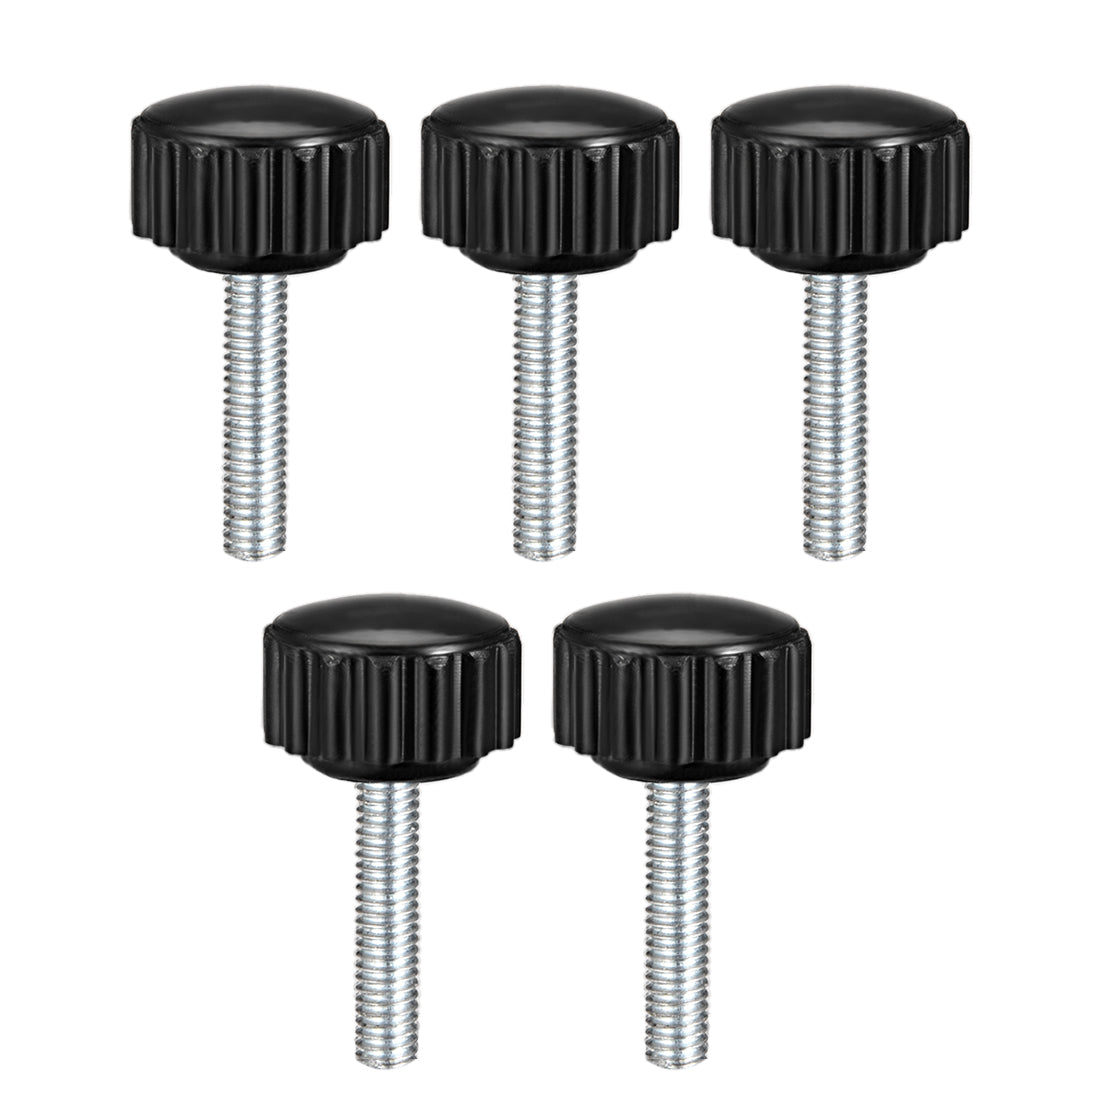 Uxcell Uxcell M6 x 30mm Male Thread Knurled Clamping Knobs Grip Thumb Screw on Type  5 Pcs